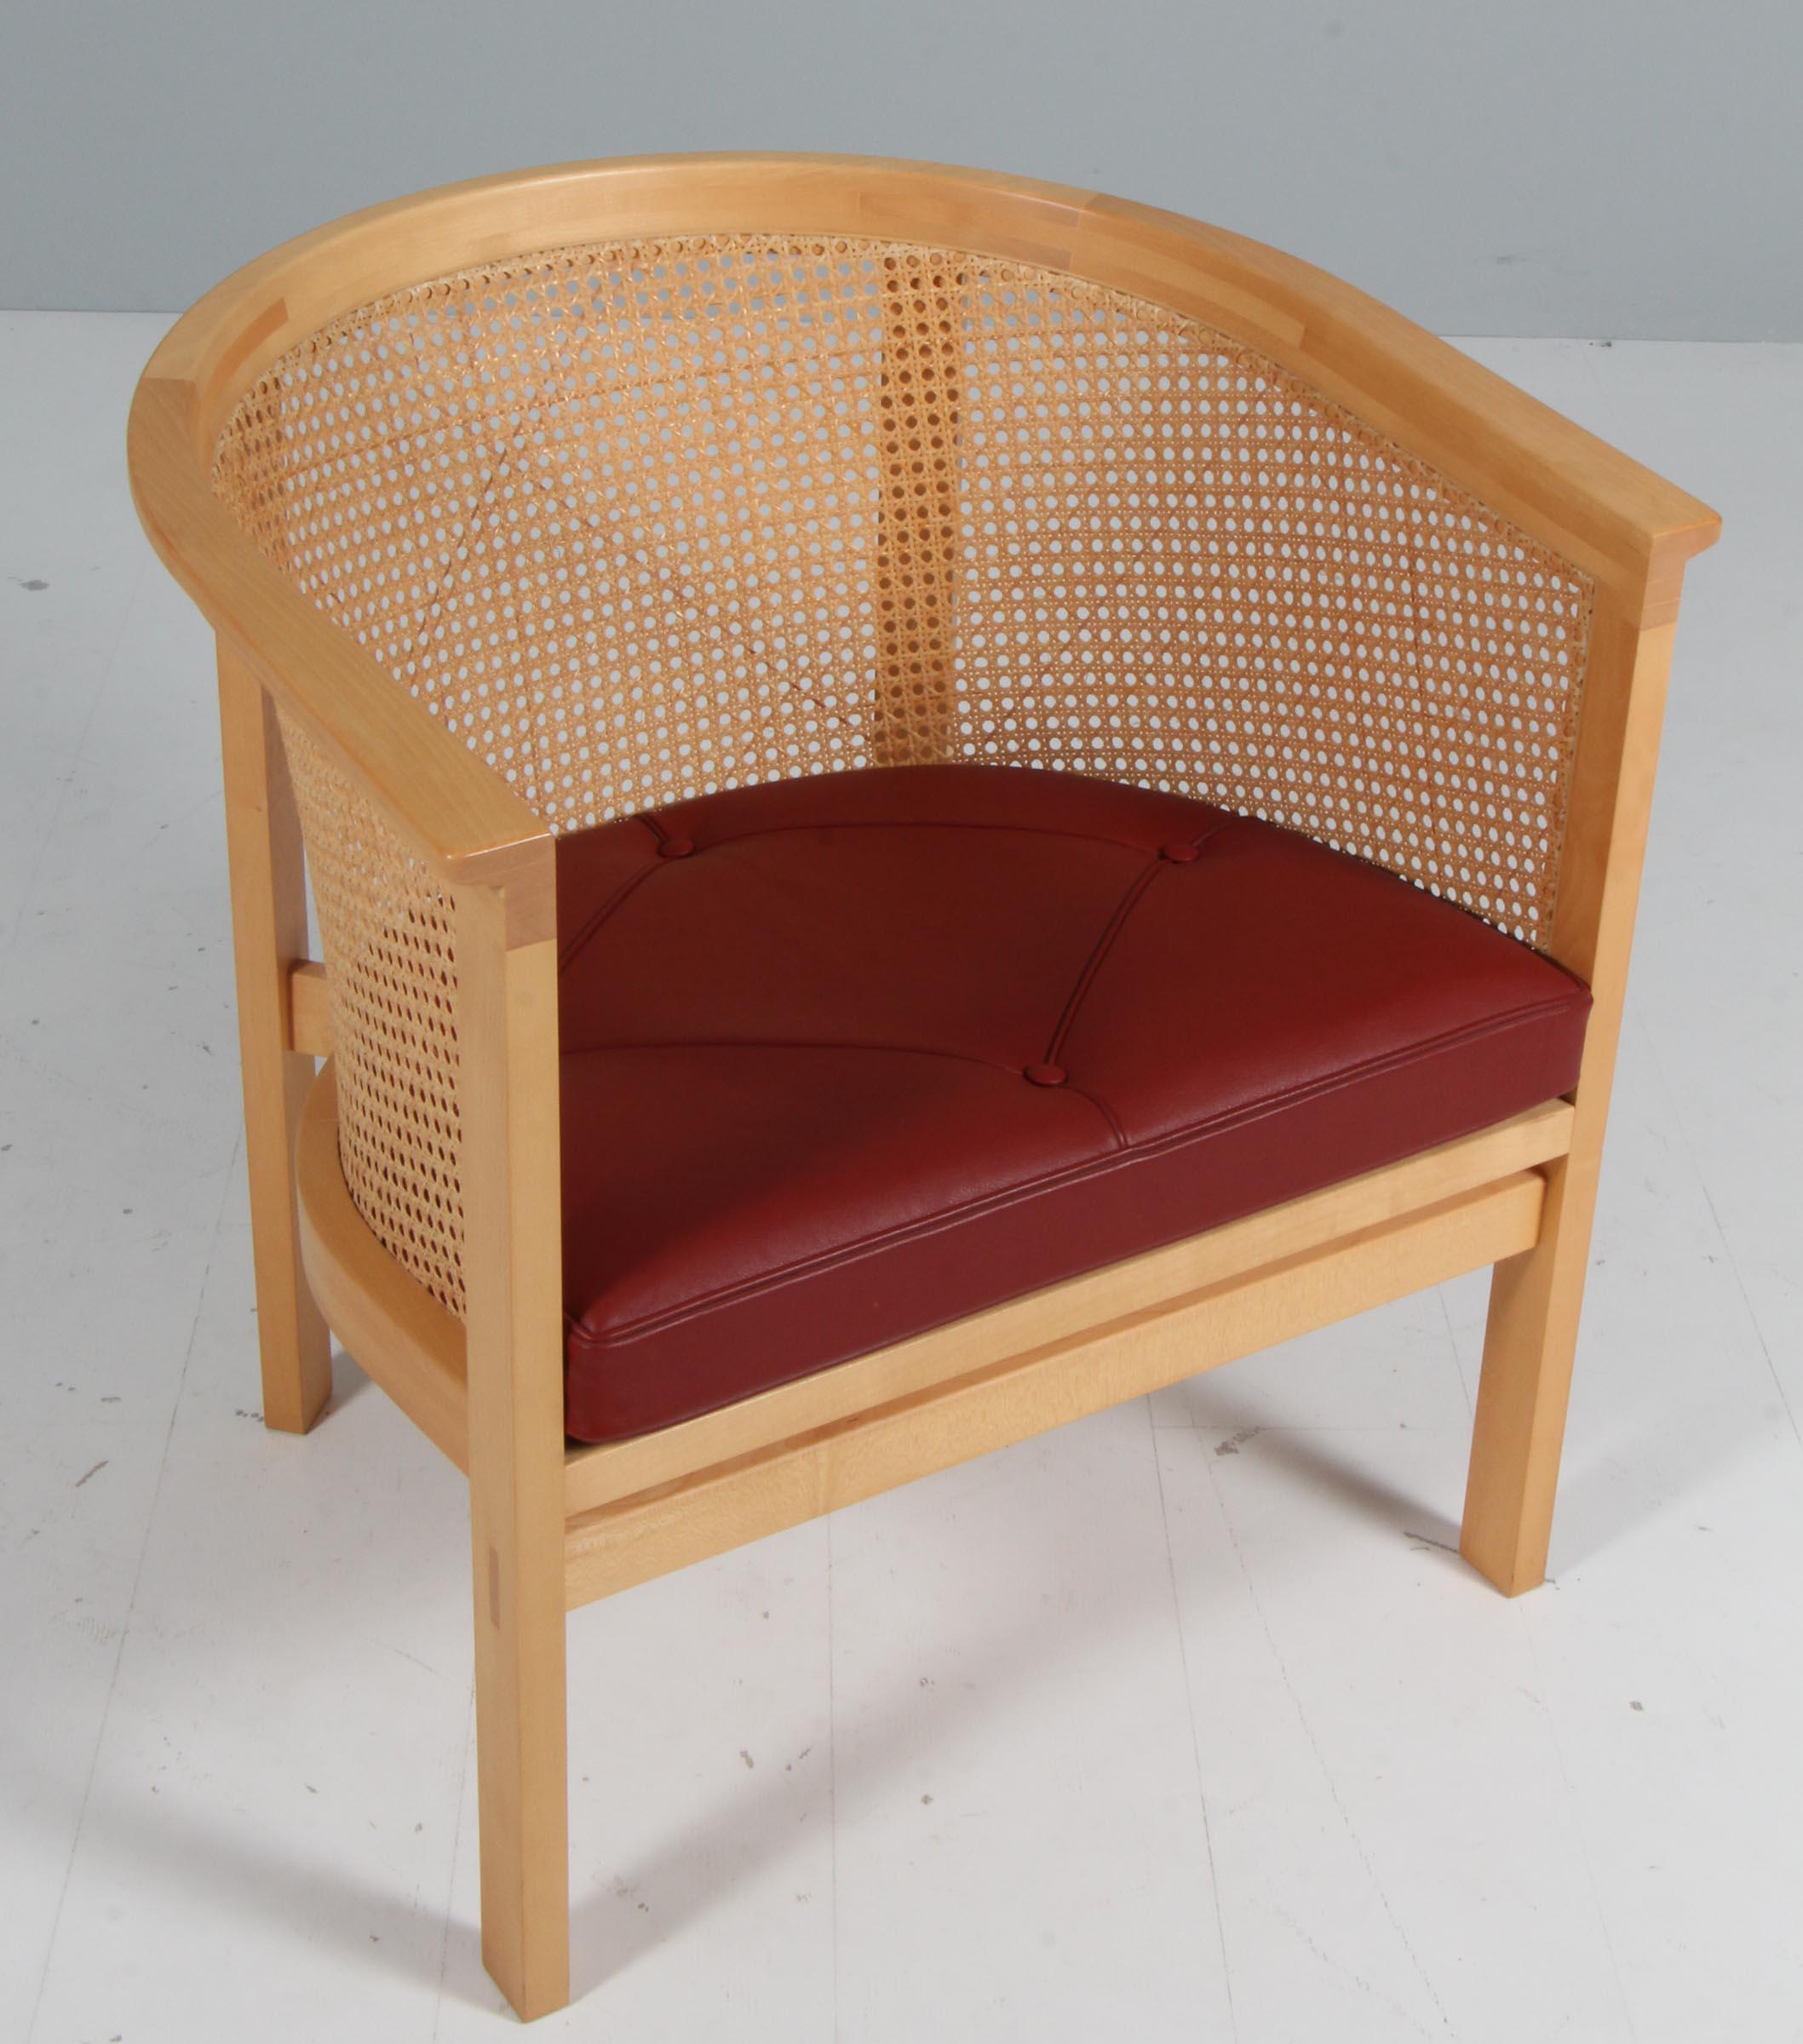 Rud Thygesen & Johnny Sørensen lounge chair with frame of maple

Cane in the back, original patinated redleather seat cushions.

From 